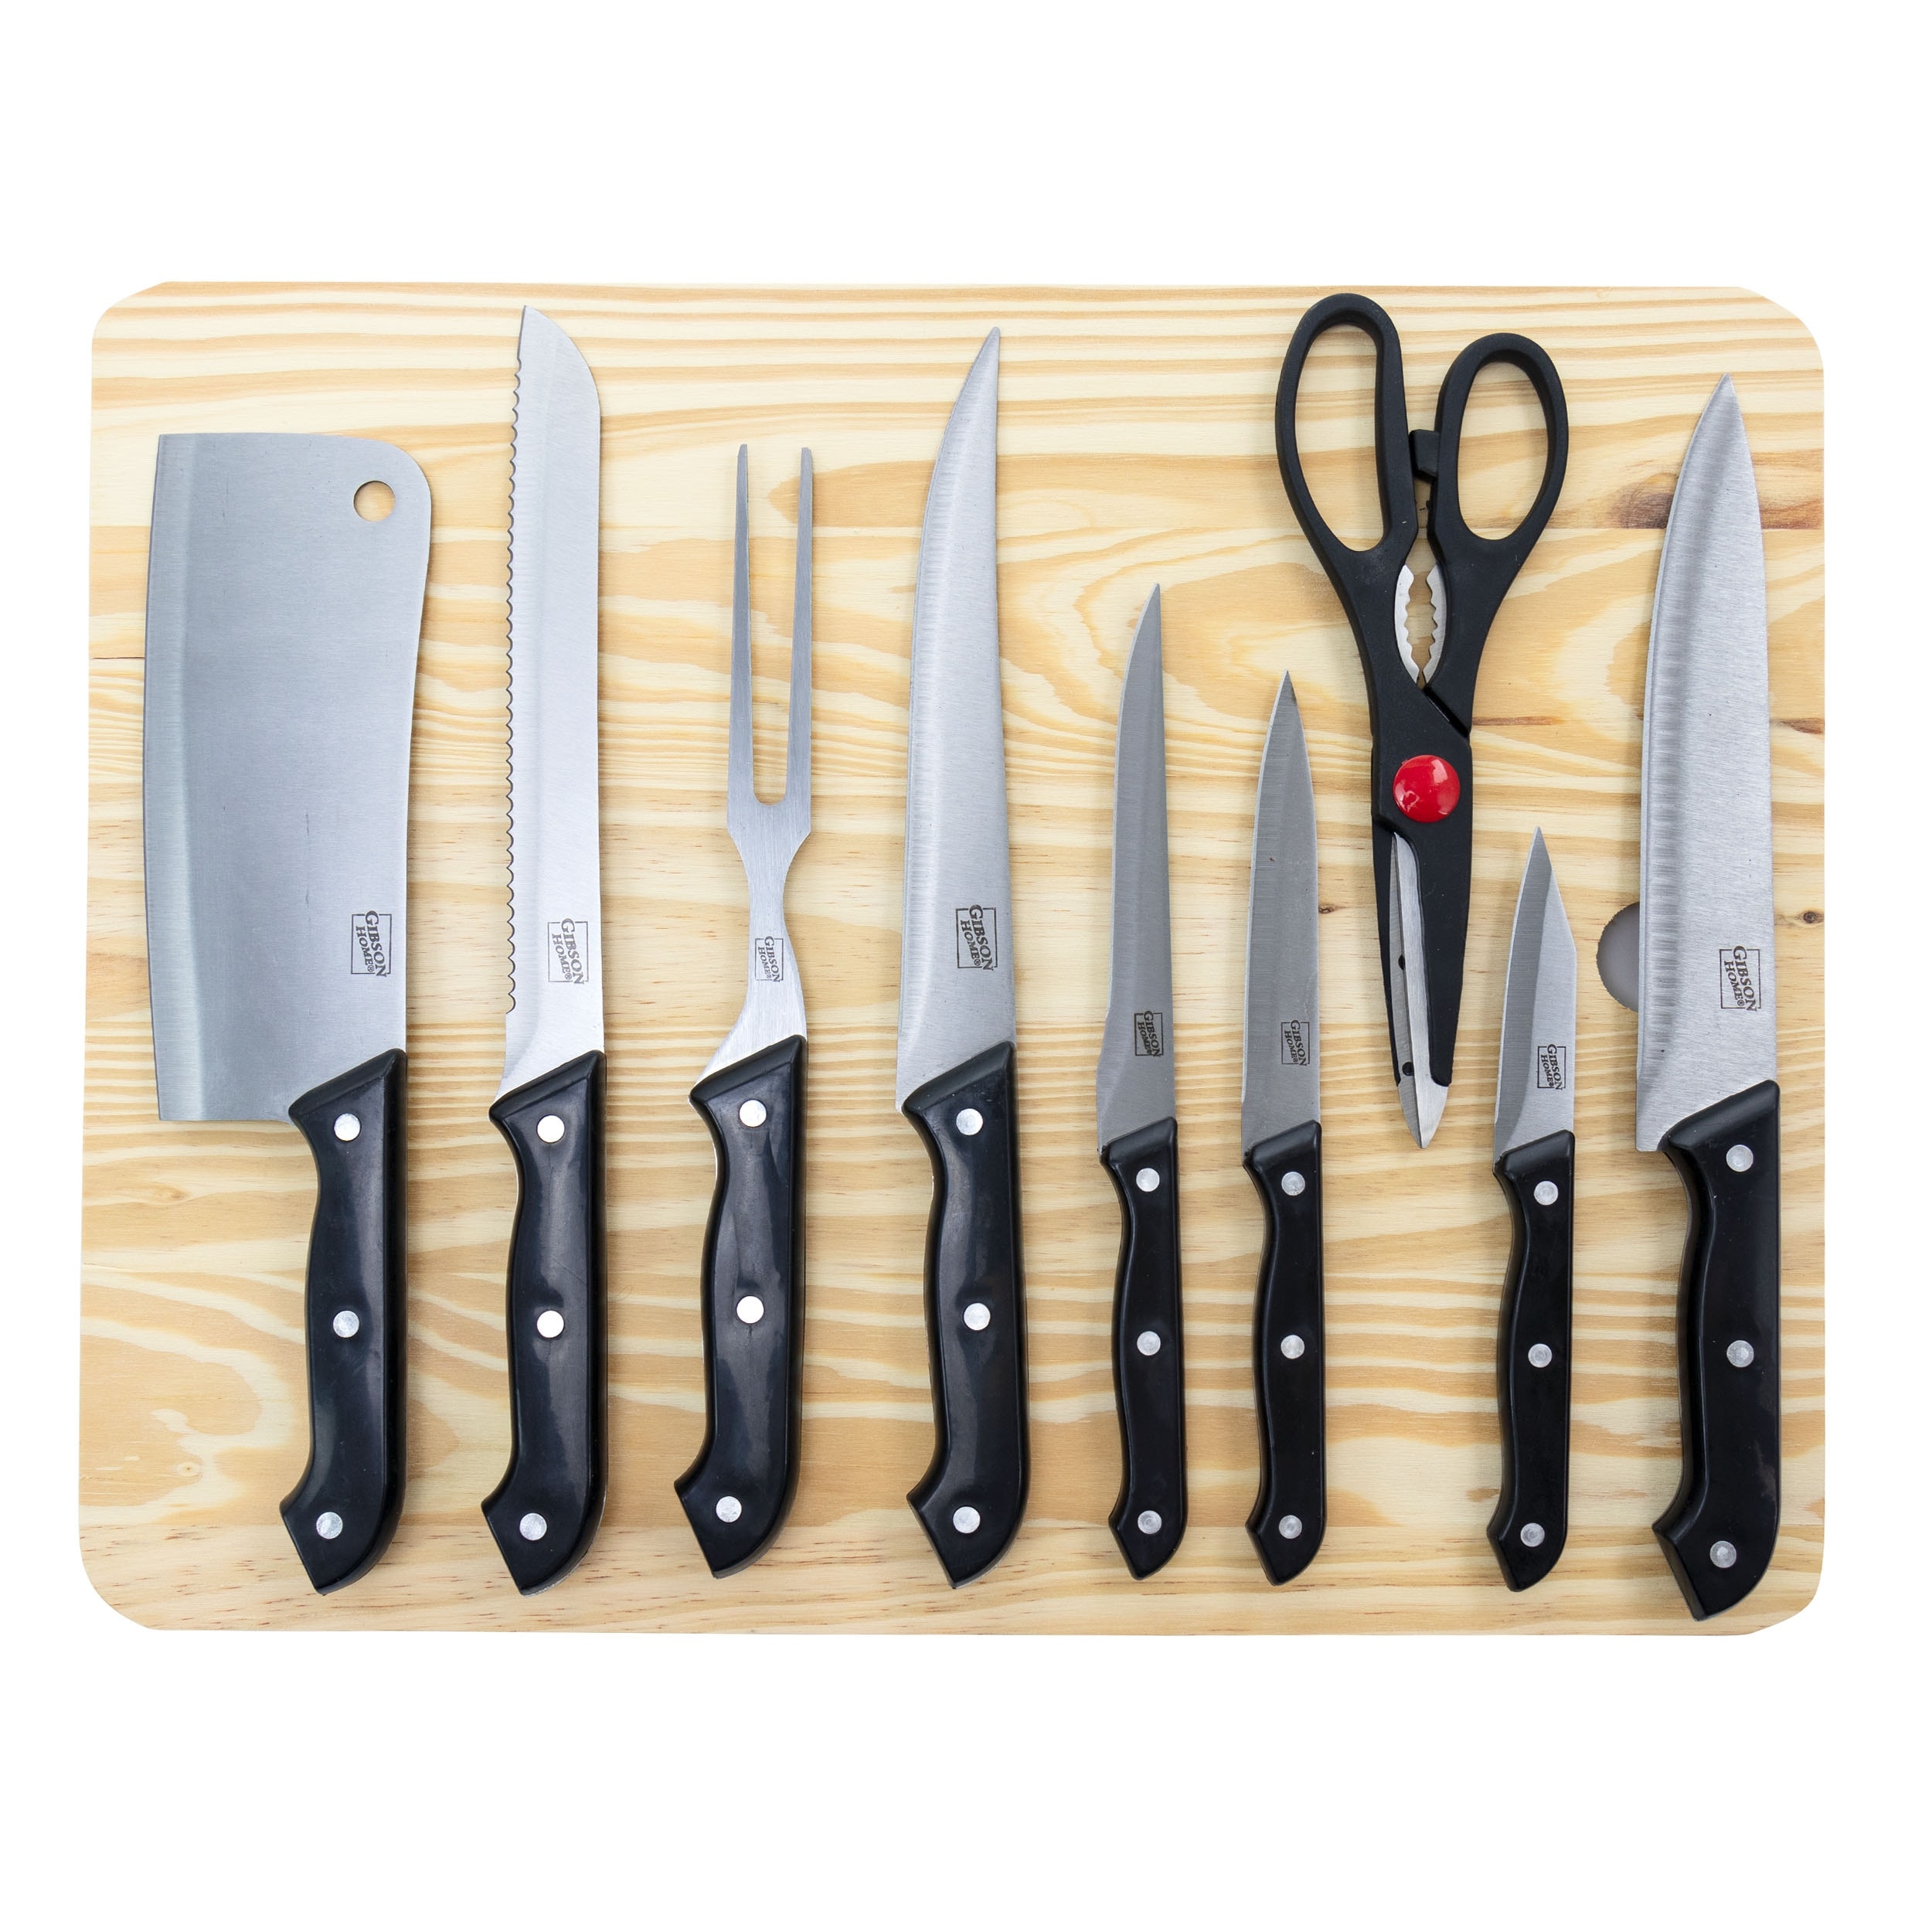 https://ak1.ostkcdn.com/images/products/is/images/direct/e899f7cd6c29ecf47a56b2d740c2d3af0bddf83b/Gibson-Home-Wildcraft-10-Piece-Cutlery-Set-with-Wooden-Cutting-Board.jpg